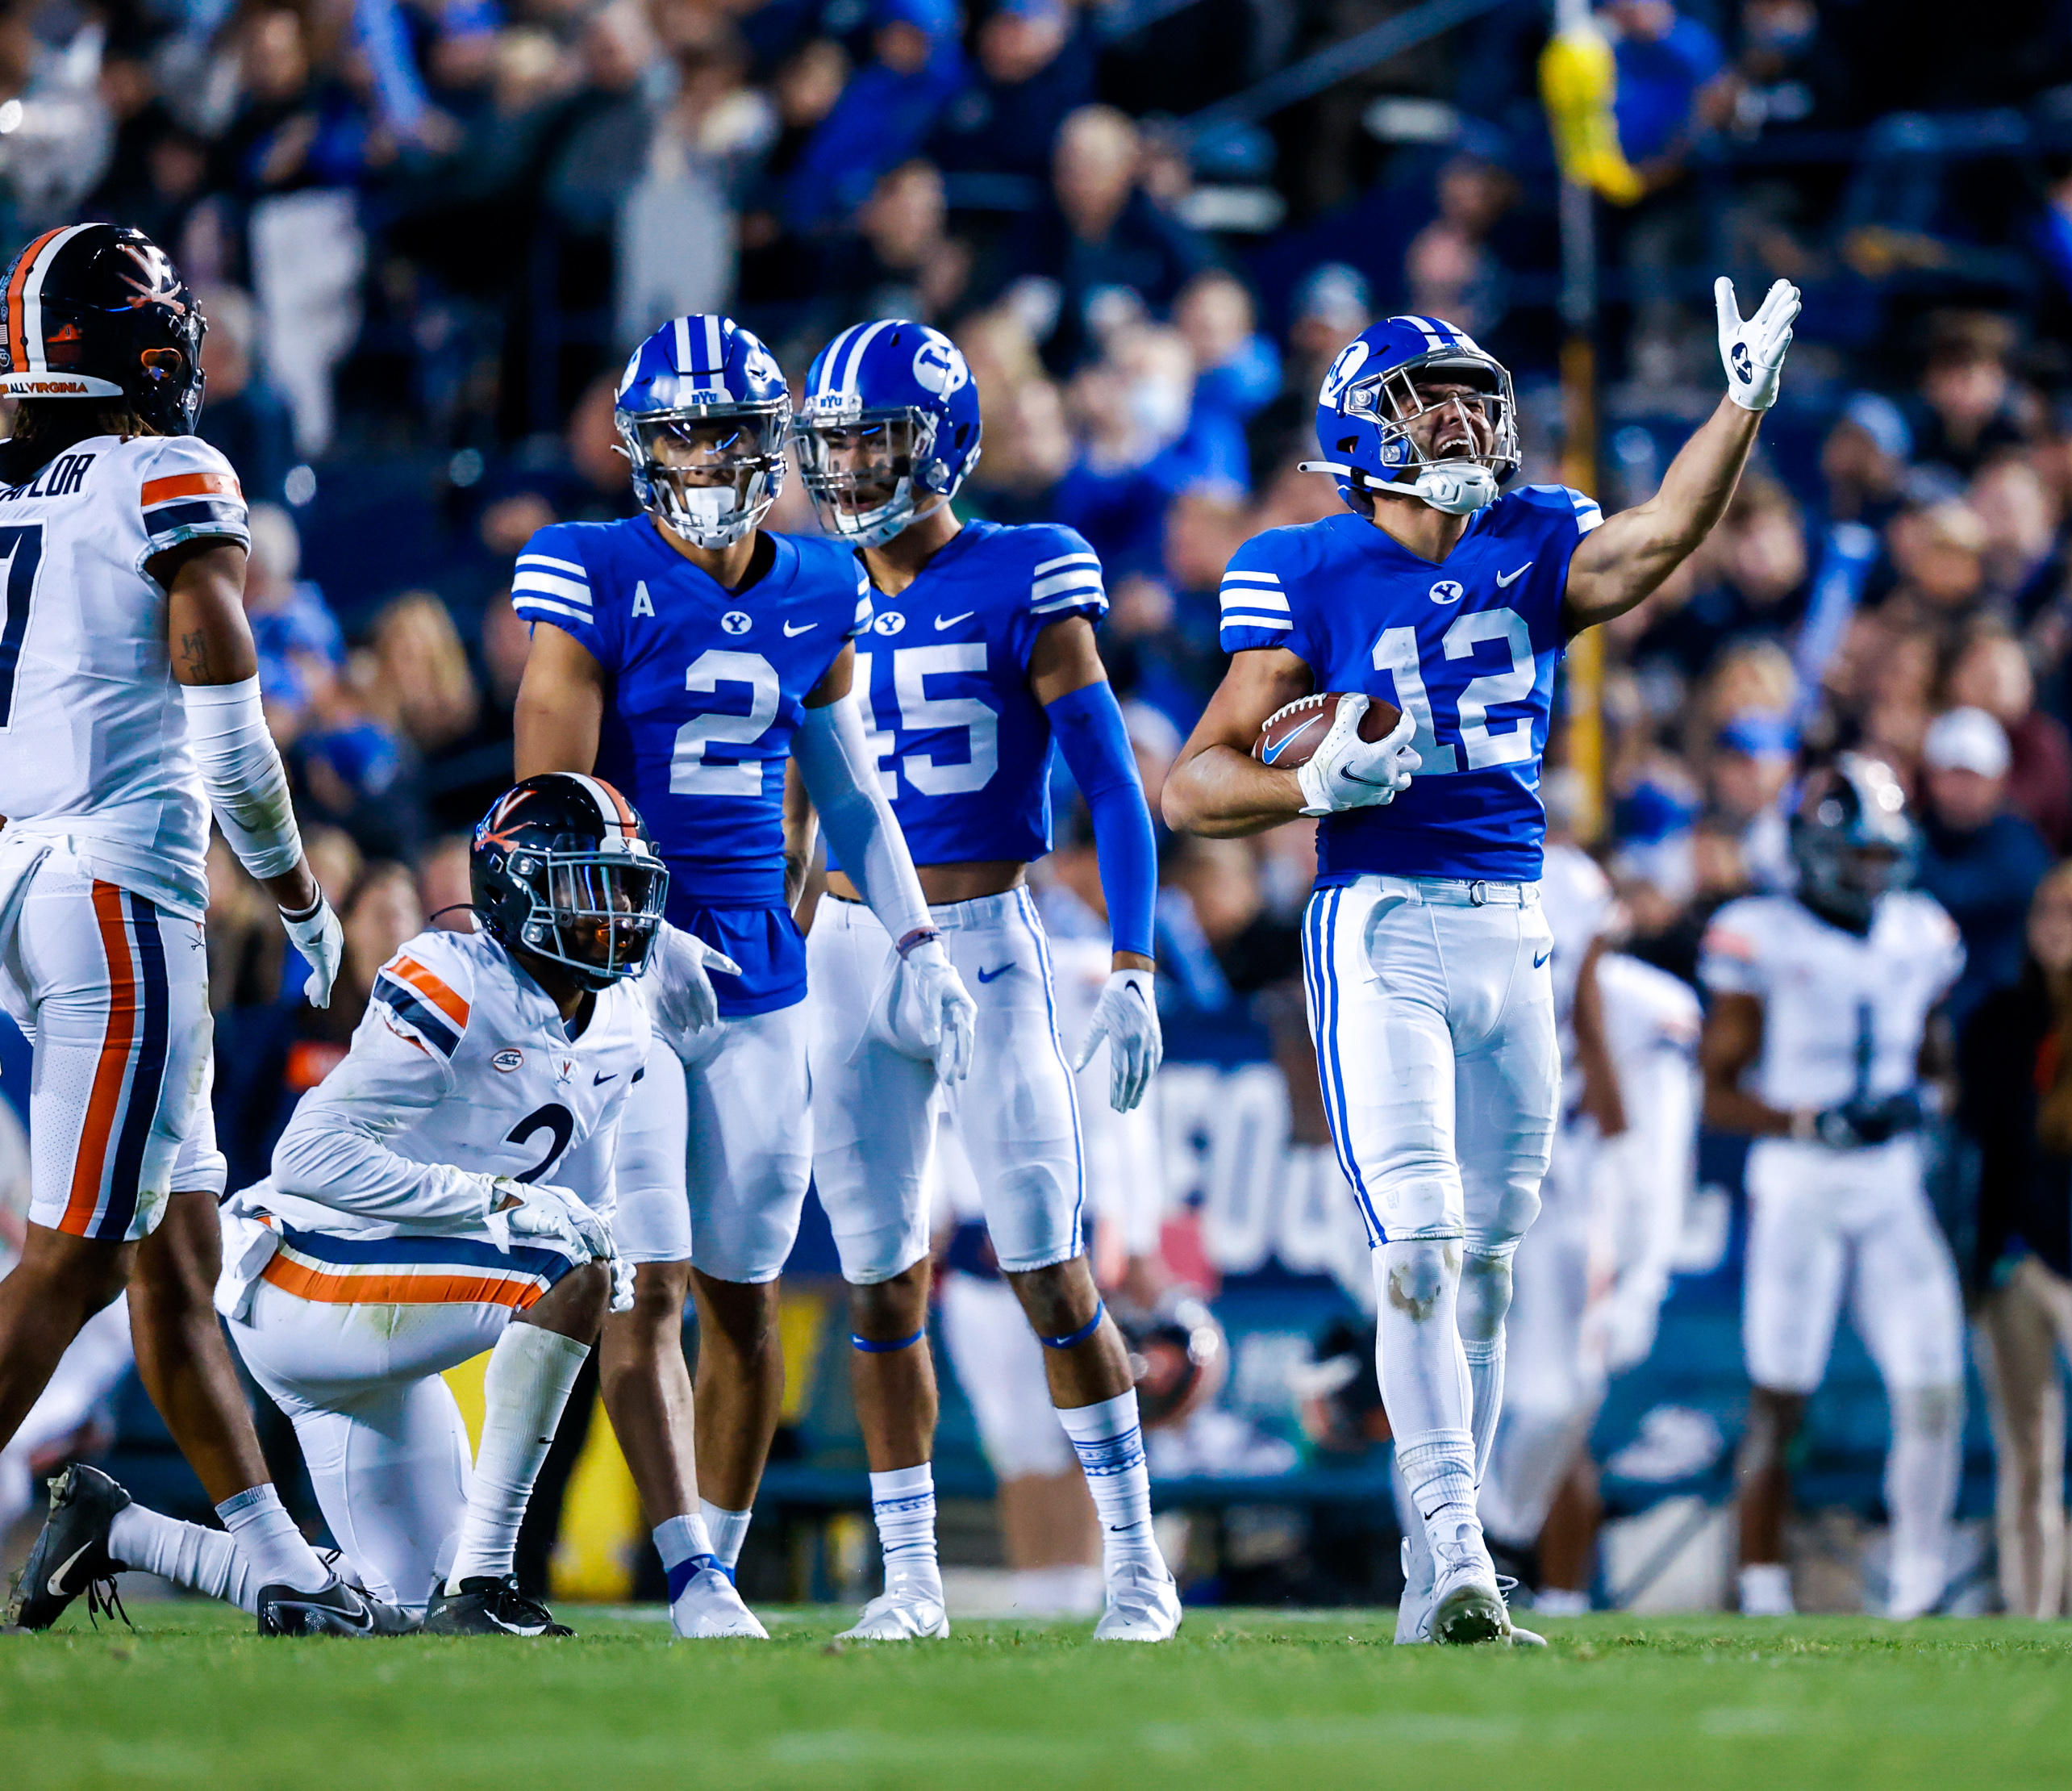 BYU wide receiver Puka Nacua celebrates a first down in the Cougars 66-49 win over the Virginia Cavaliers.